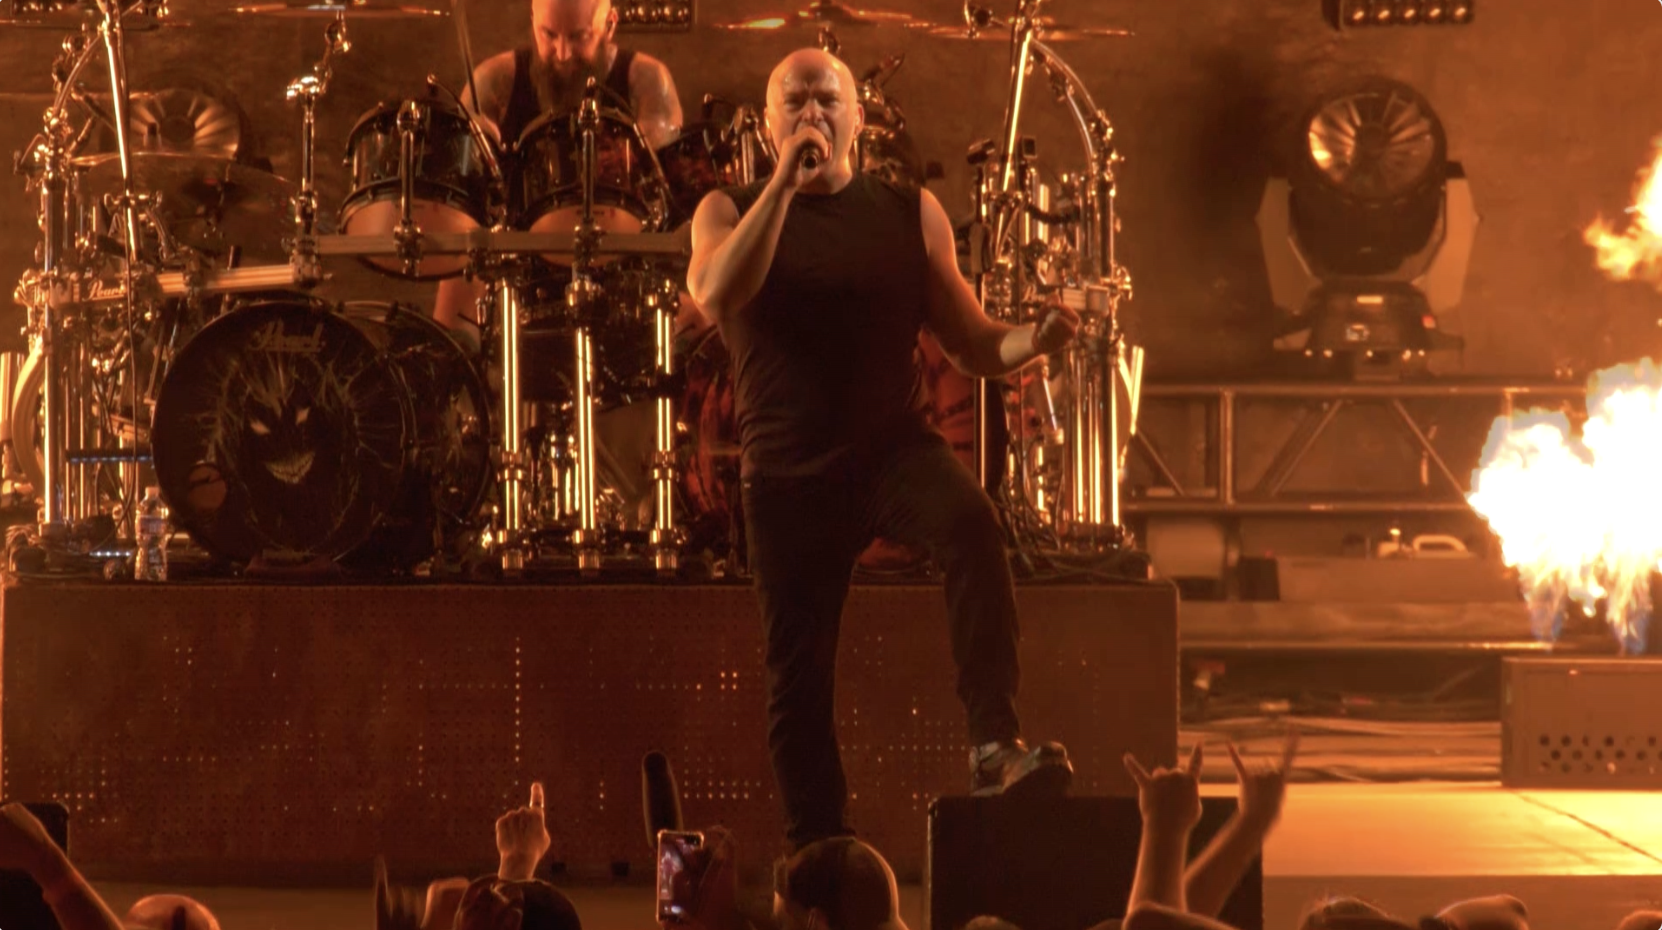 Unstoppable by Disturbed live video